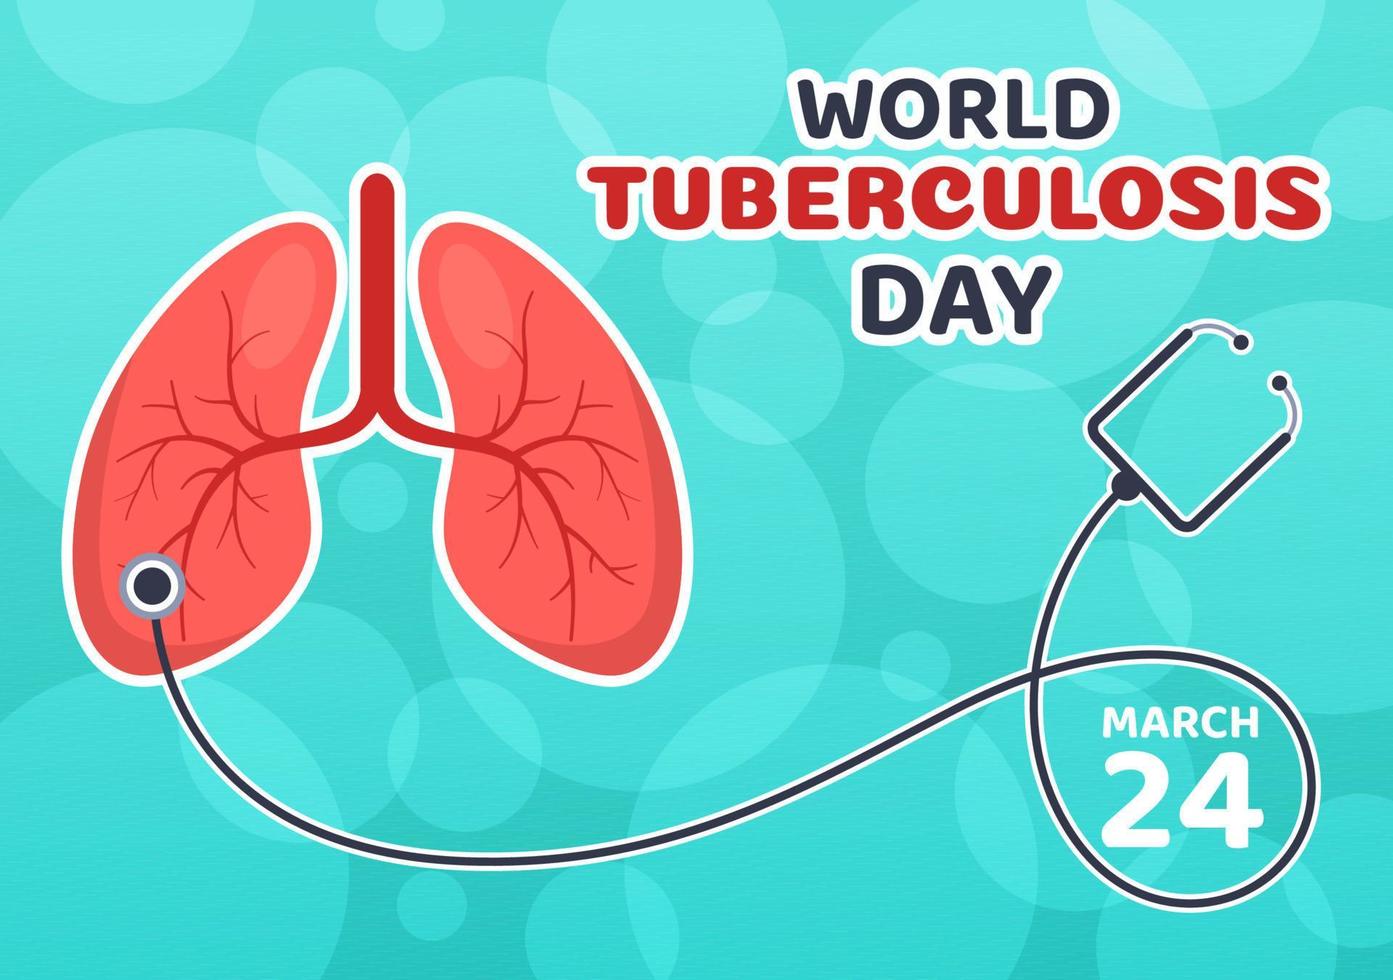 World Tuberculosis Day on March 24 Illustration with Pictures of the Lungs and Organ Inspection in Flat Cartoon Hand Drawn Landing Page Templates vector